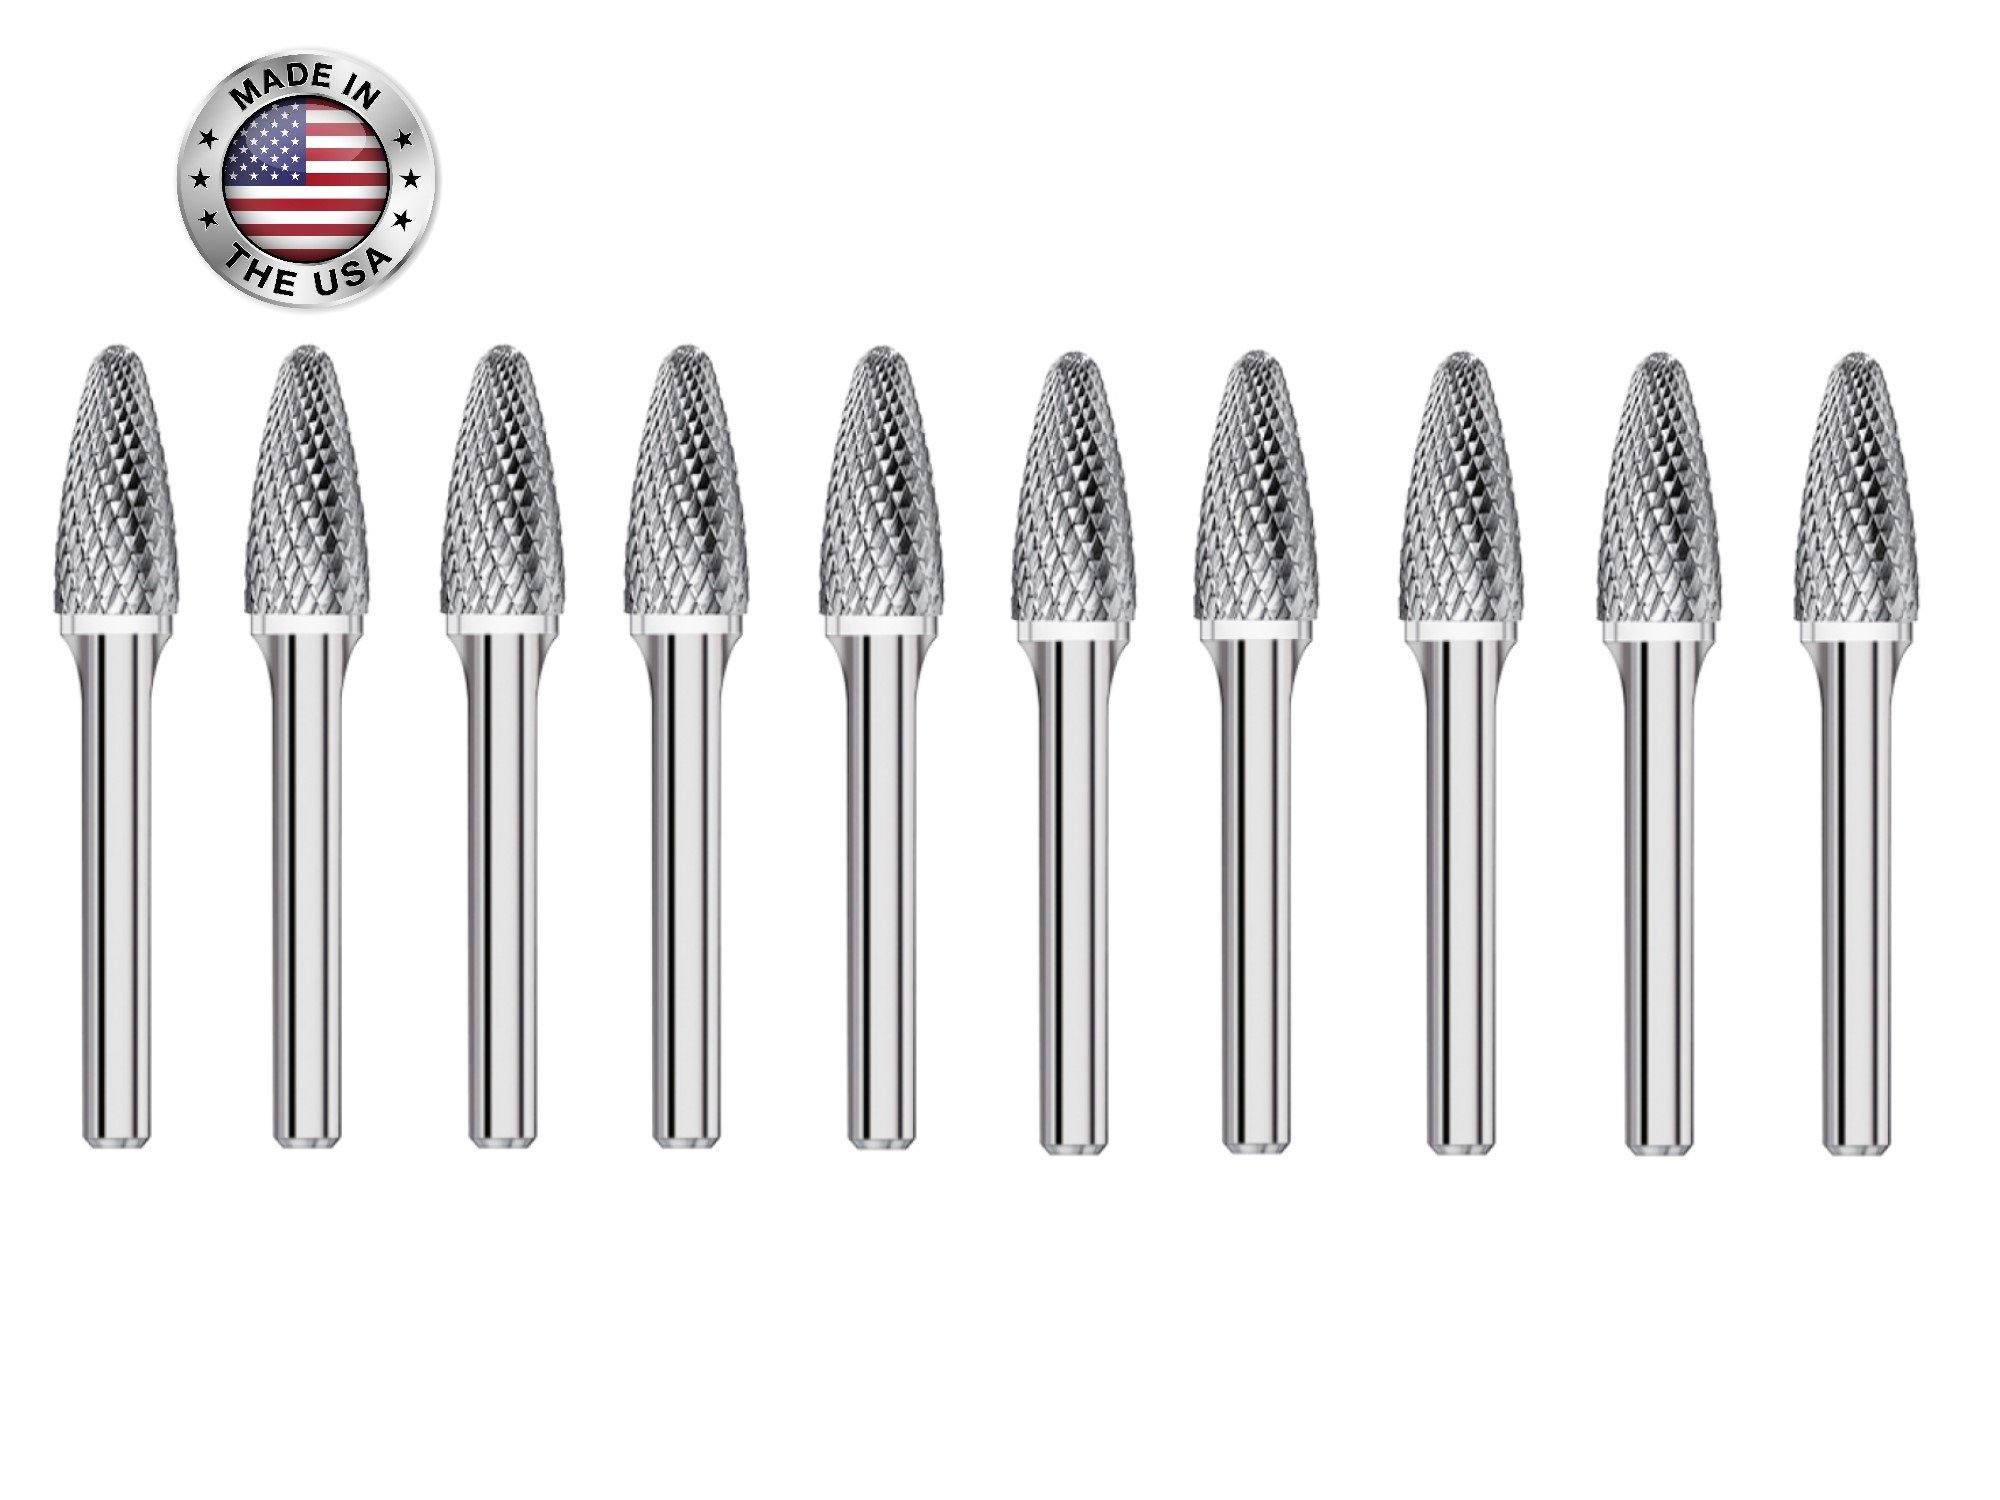 SF-1 Burr (10 Pack) 1/4" x 5/8" Cut Length x 2" OAL on 1/4" Shanks - The End Mill Store 